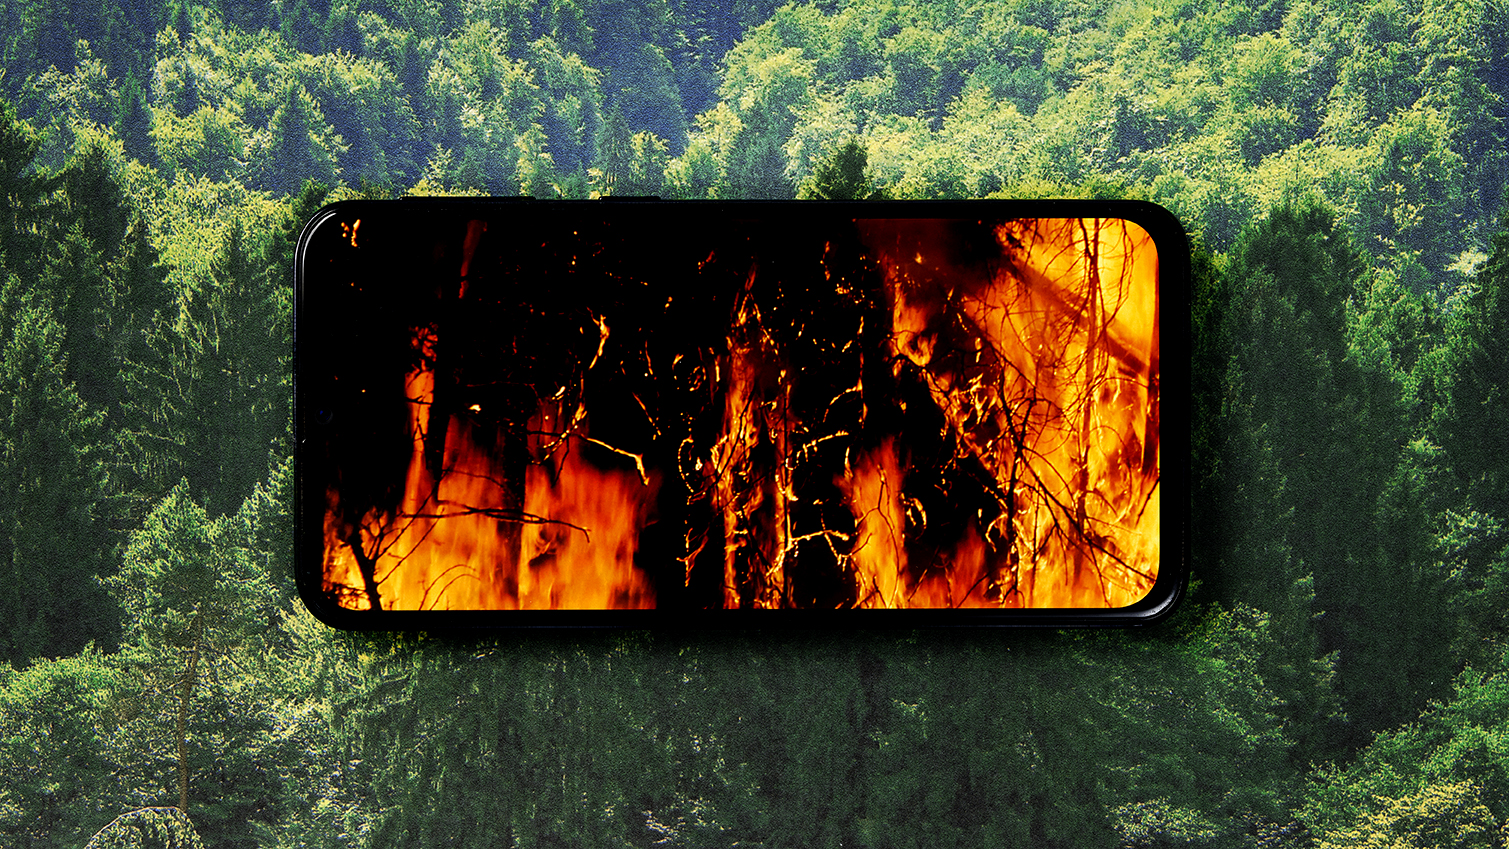 A wildfire burning on a mobile phone screen over the image of a healthy forest.